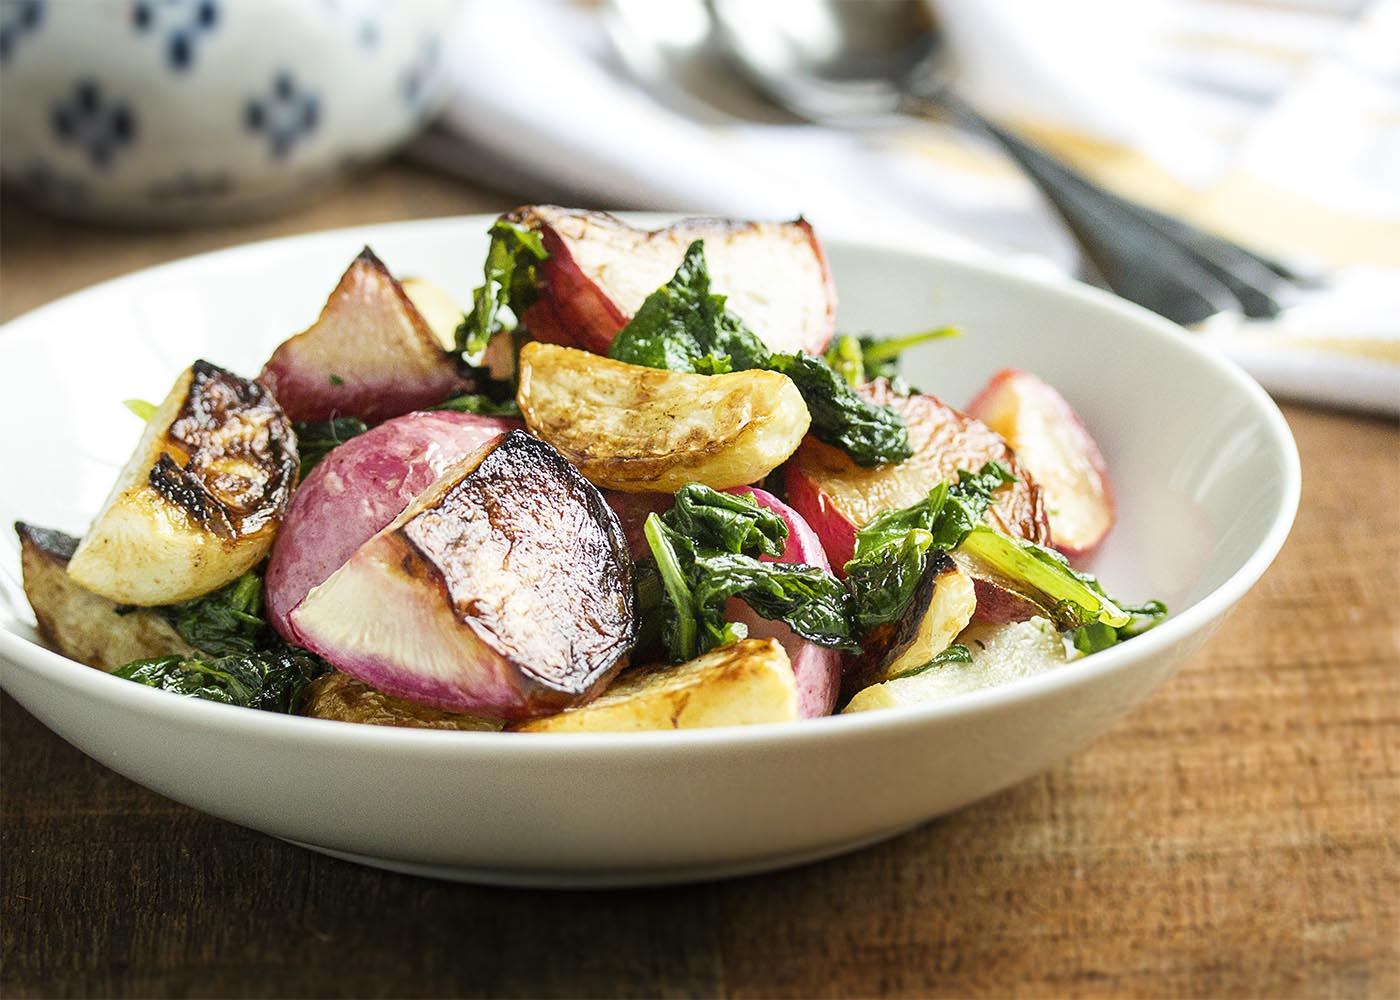 Roasted Turnips and Radishes - Sweet Hakurei turnips and young radishes are tossed with olive oil and roasted with their greens in this simple and satisfying side dish. | justalittlebitofbacon.com